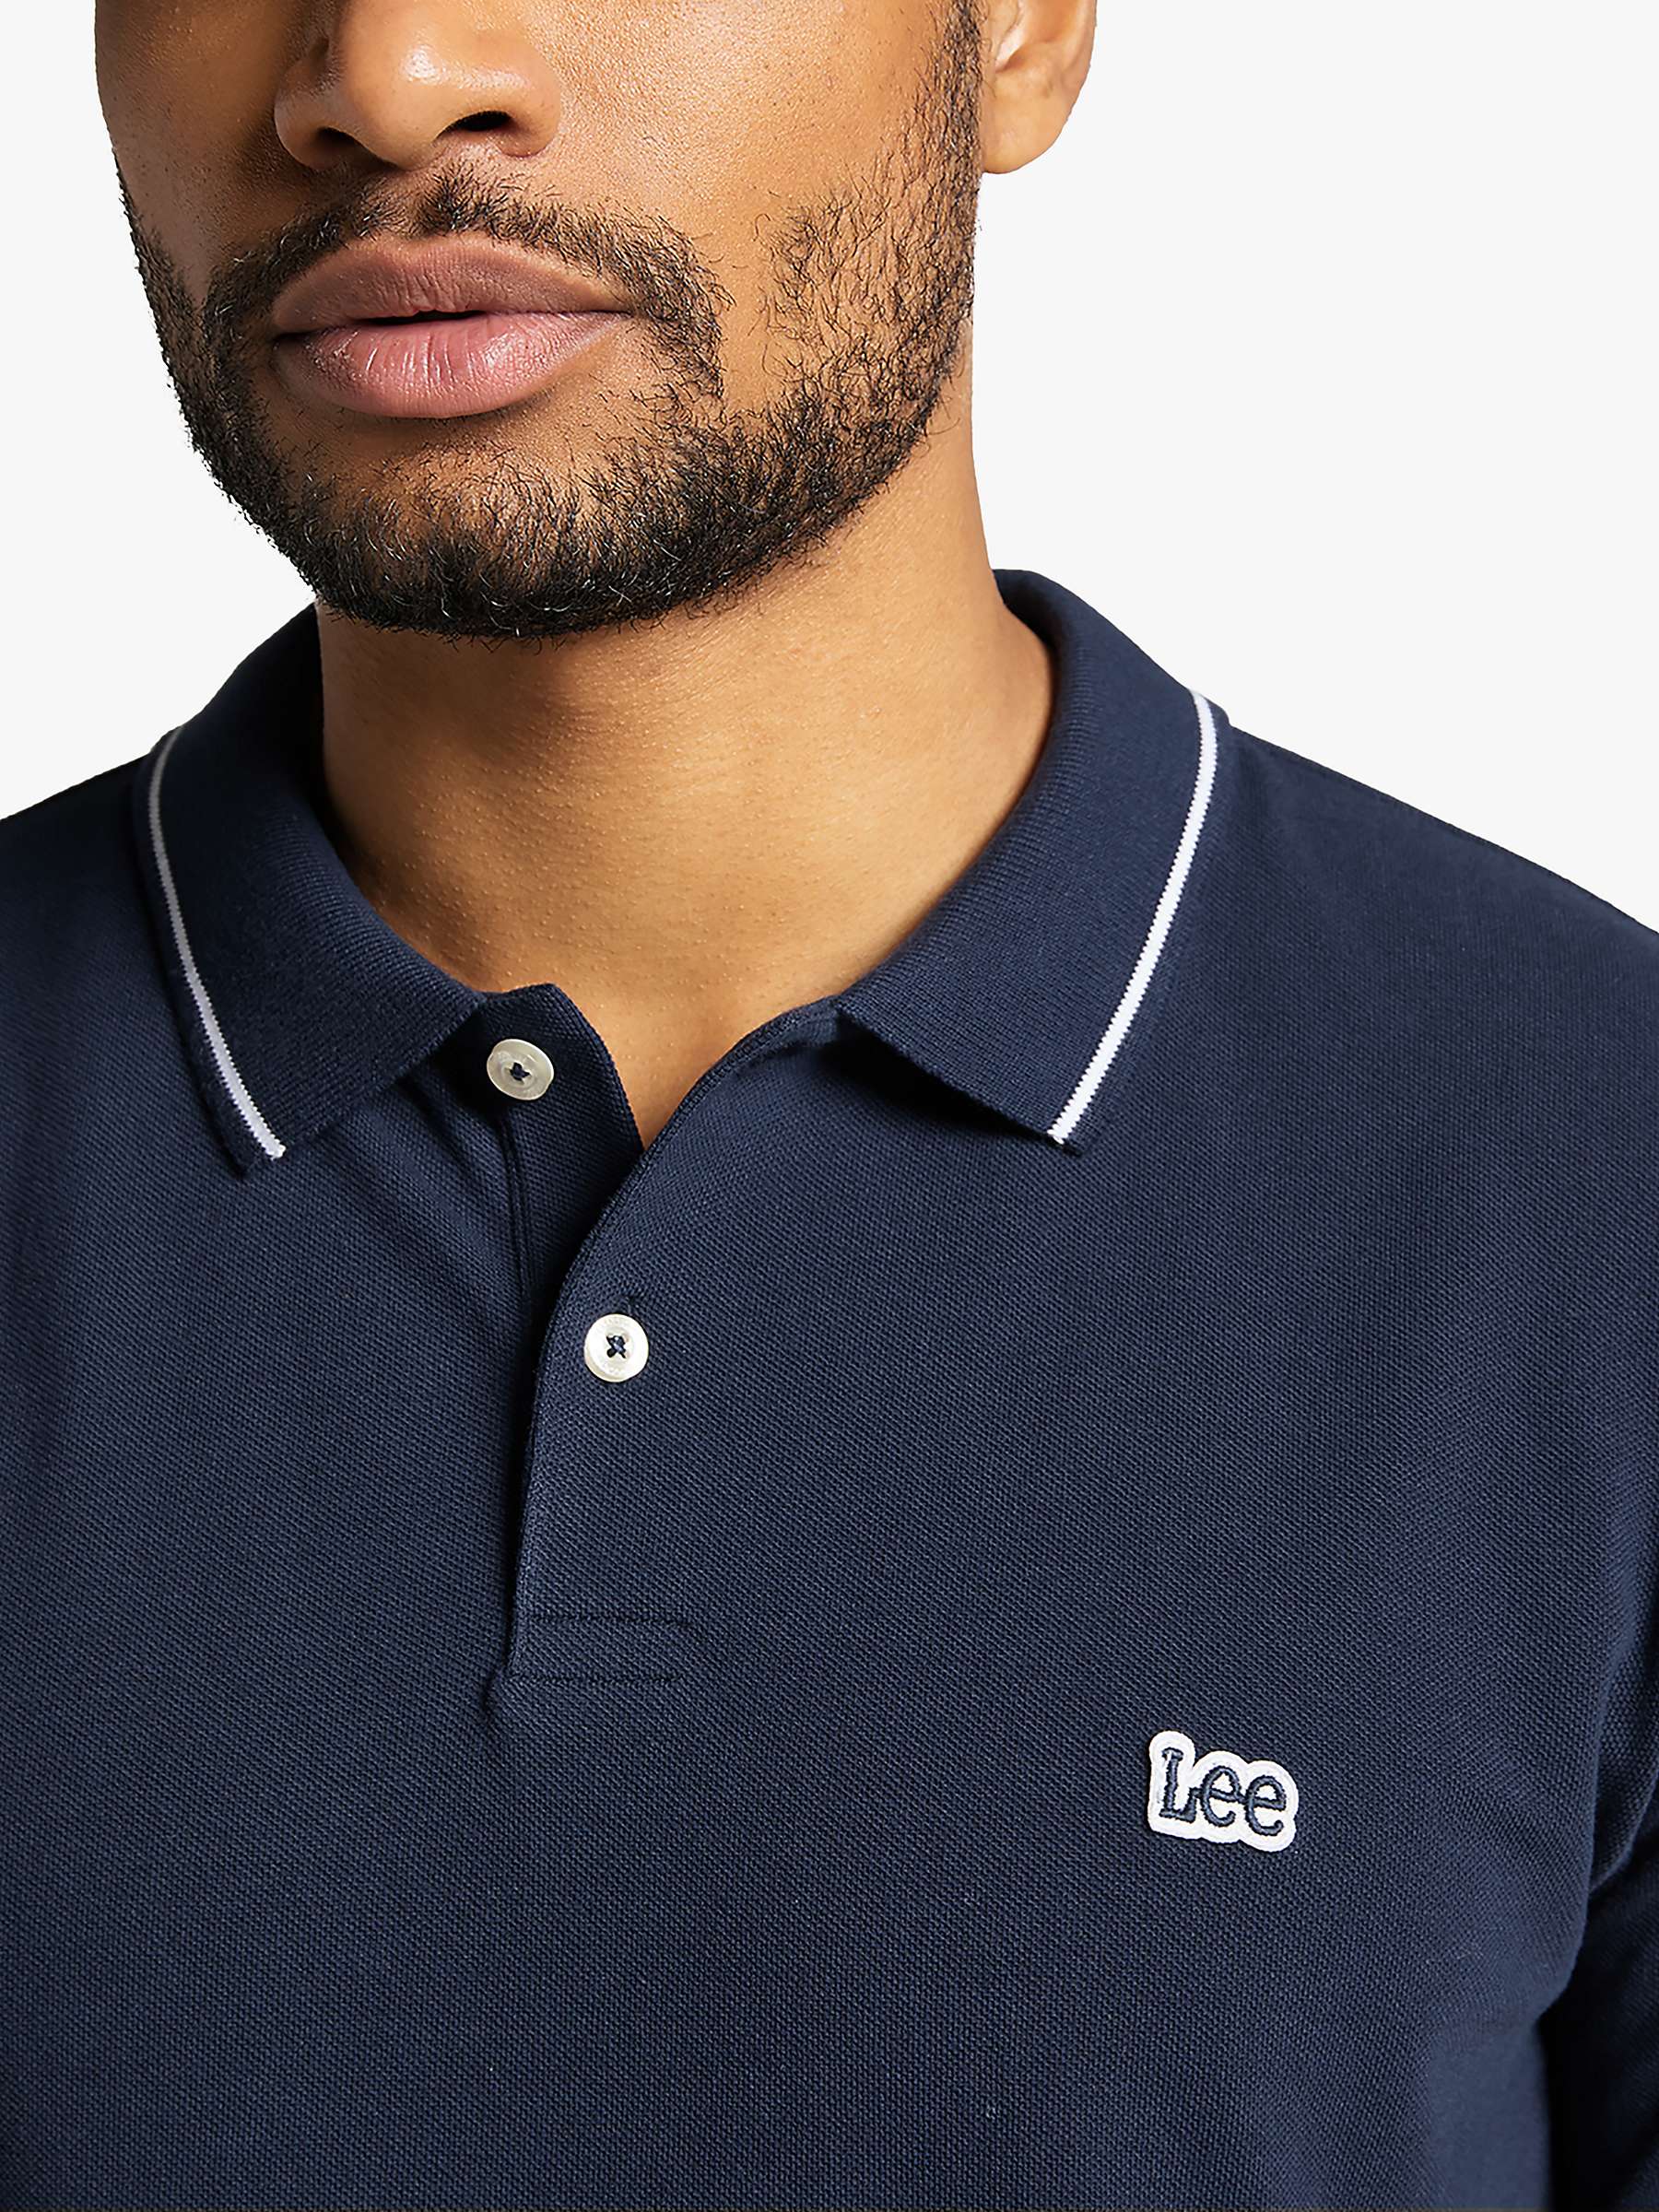 Lee Short Sleeve Polo Top, Navy at John Lewis & Partners